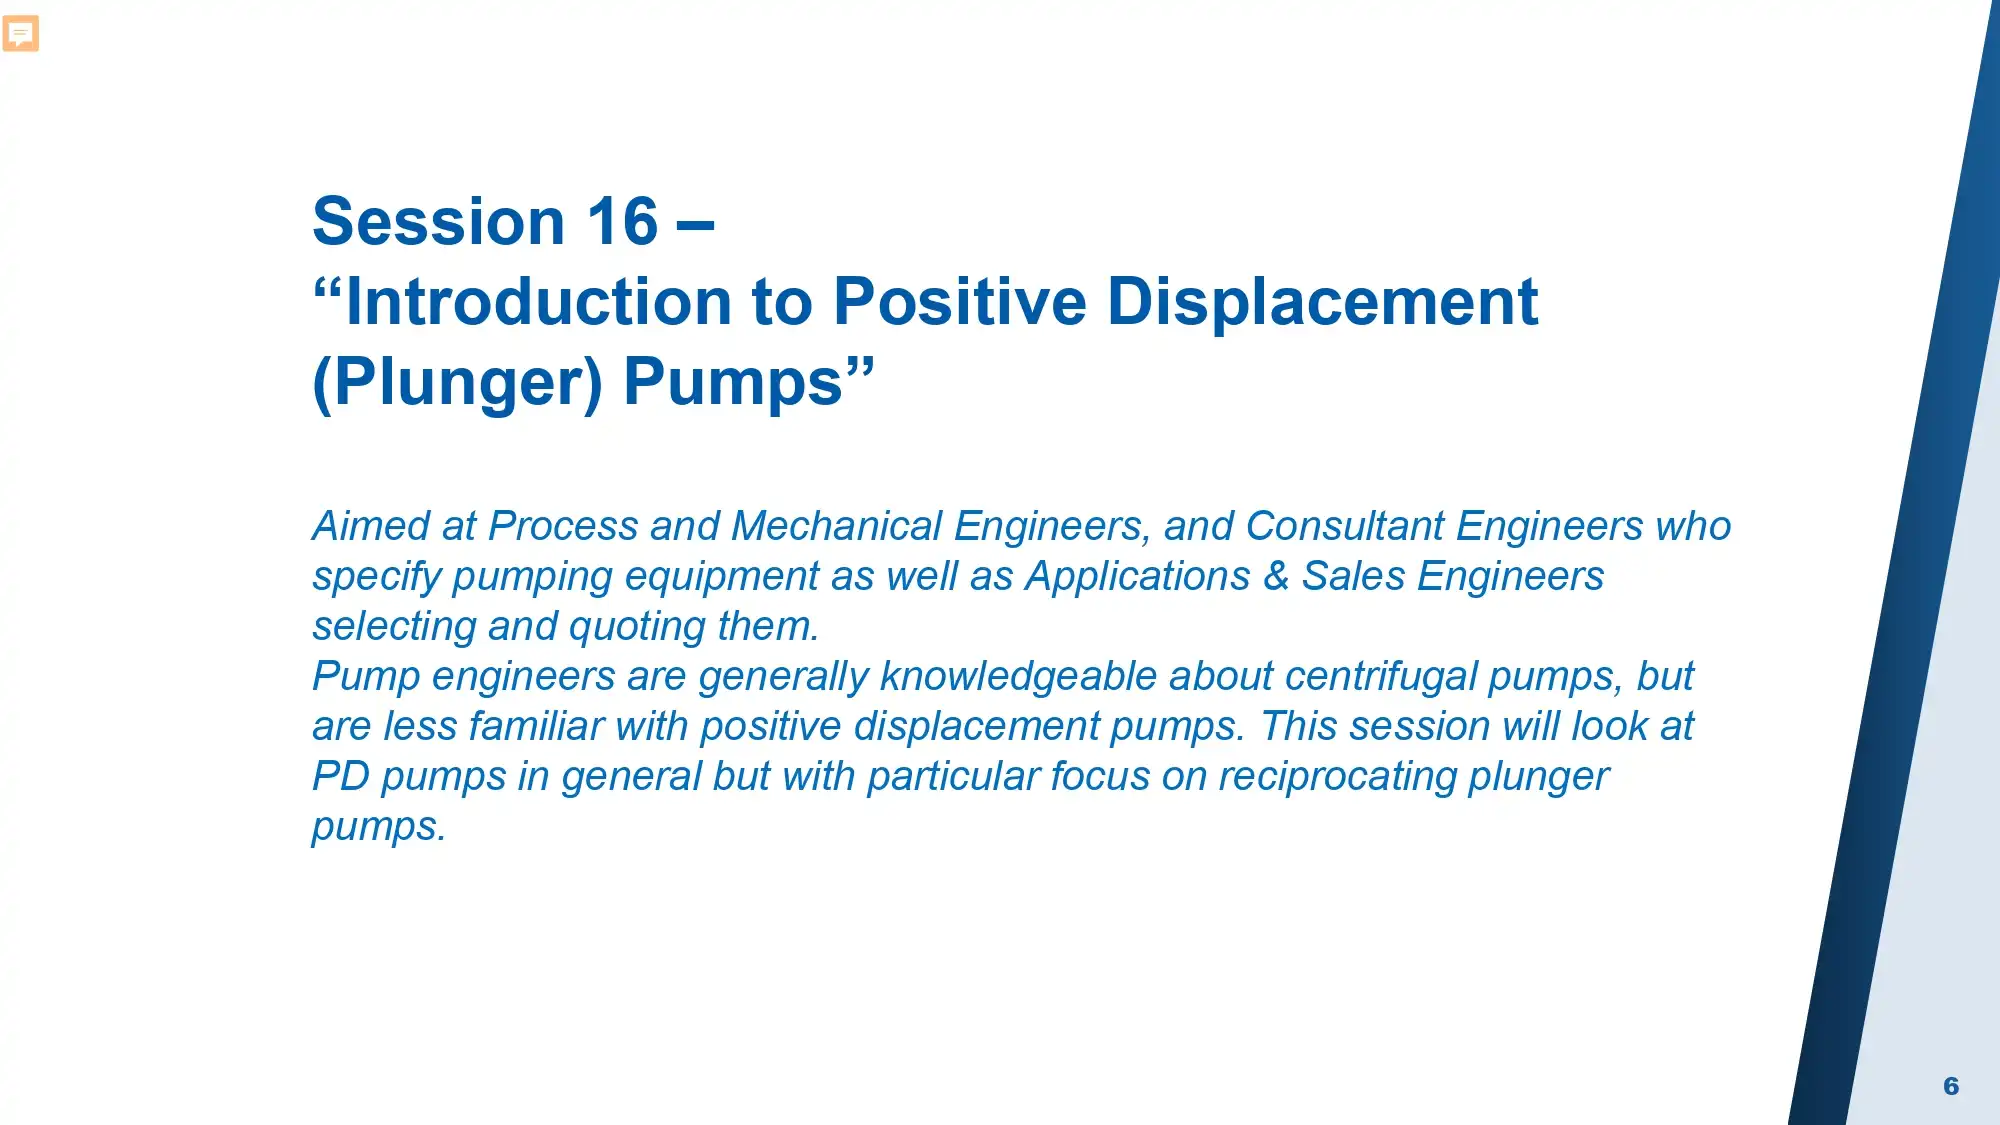 Session 16 –“Introduction to Positive Displacement (Plunger) Pumps”